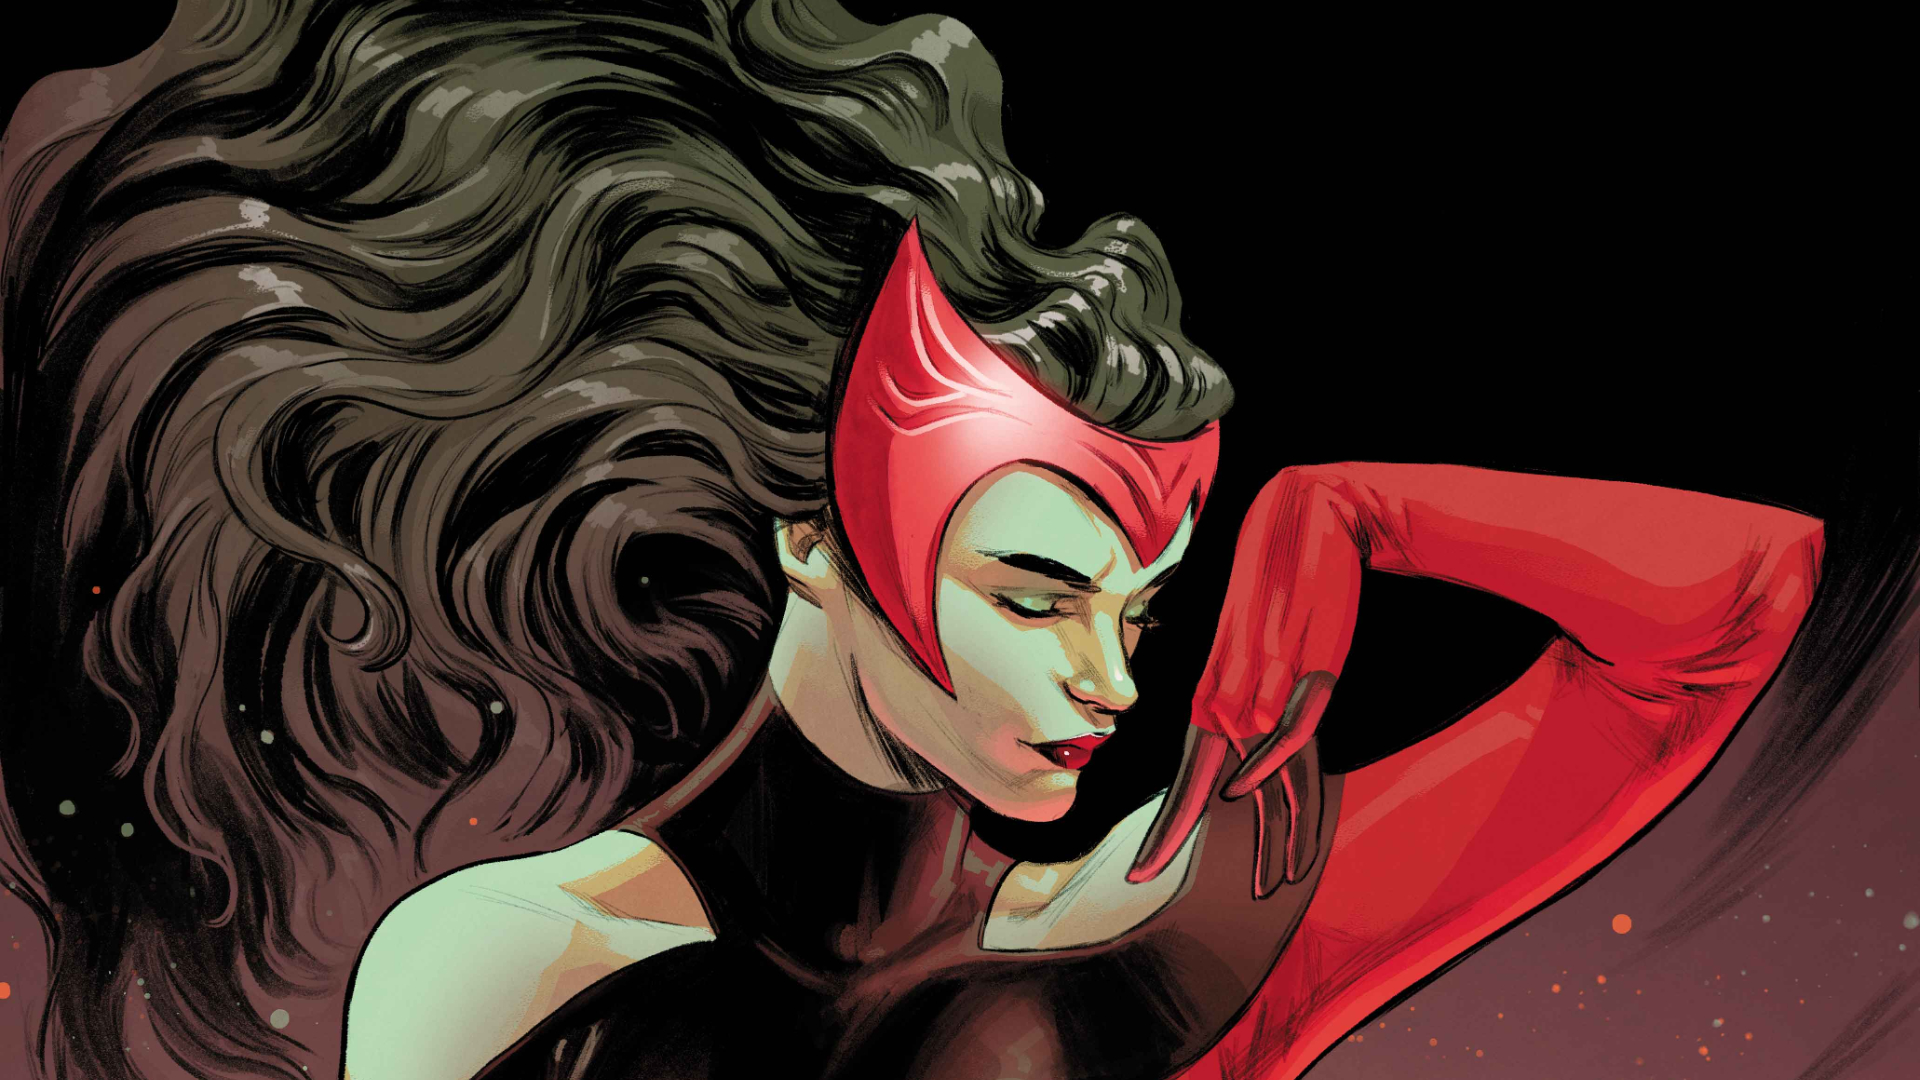 Scarlet Witch (2023) #3 (Variant), Comic Issues